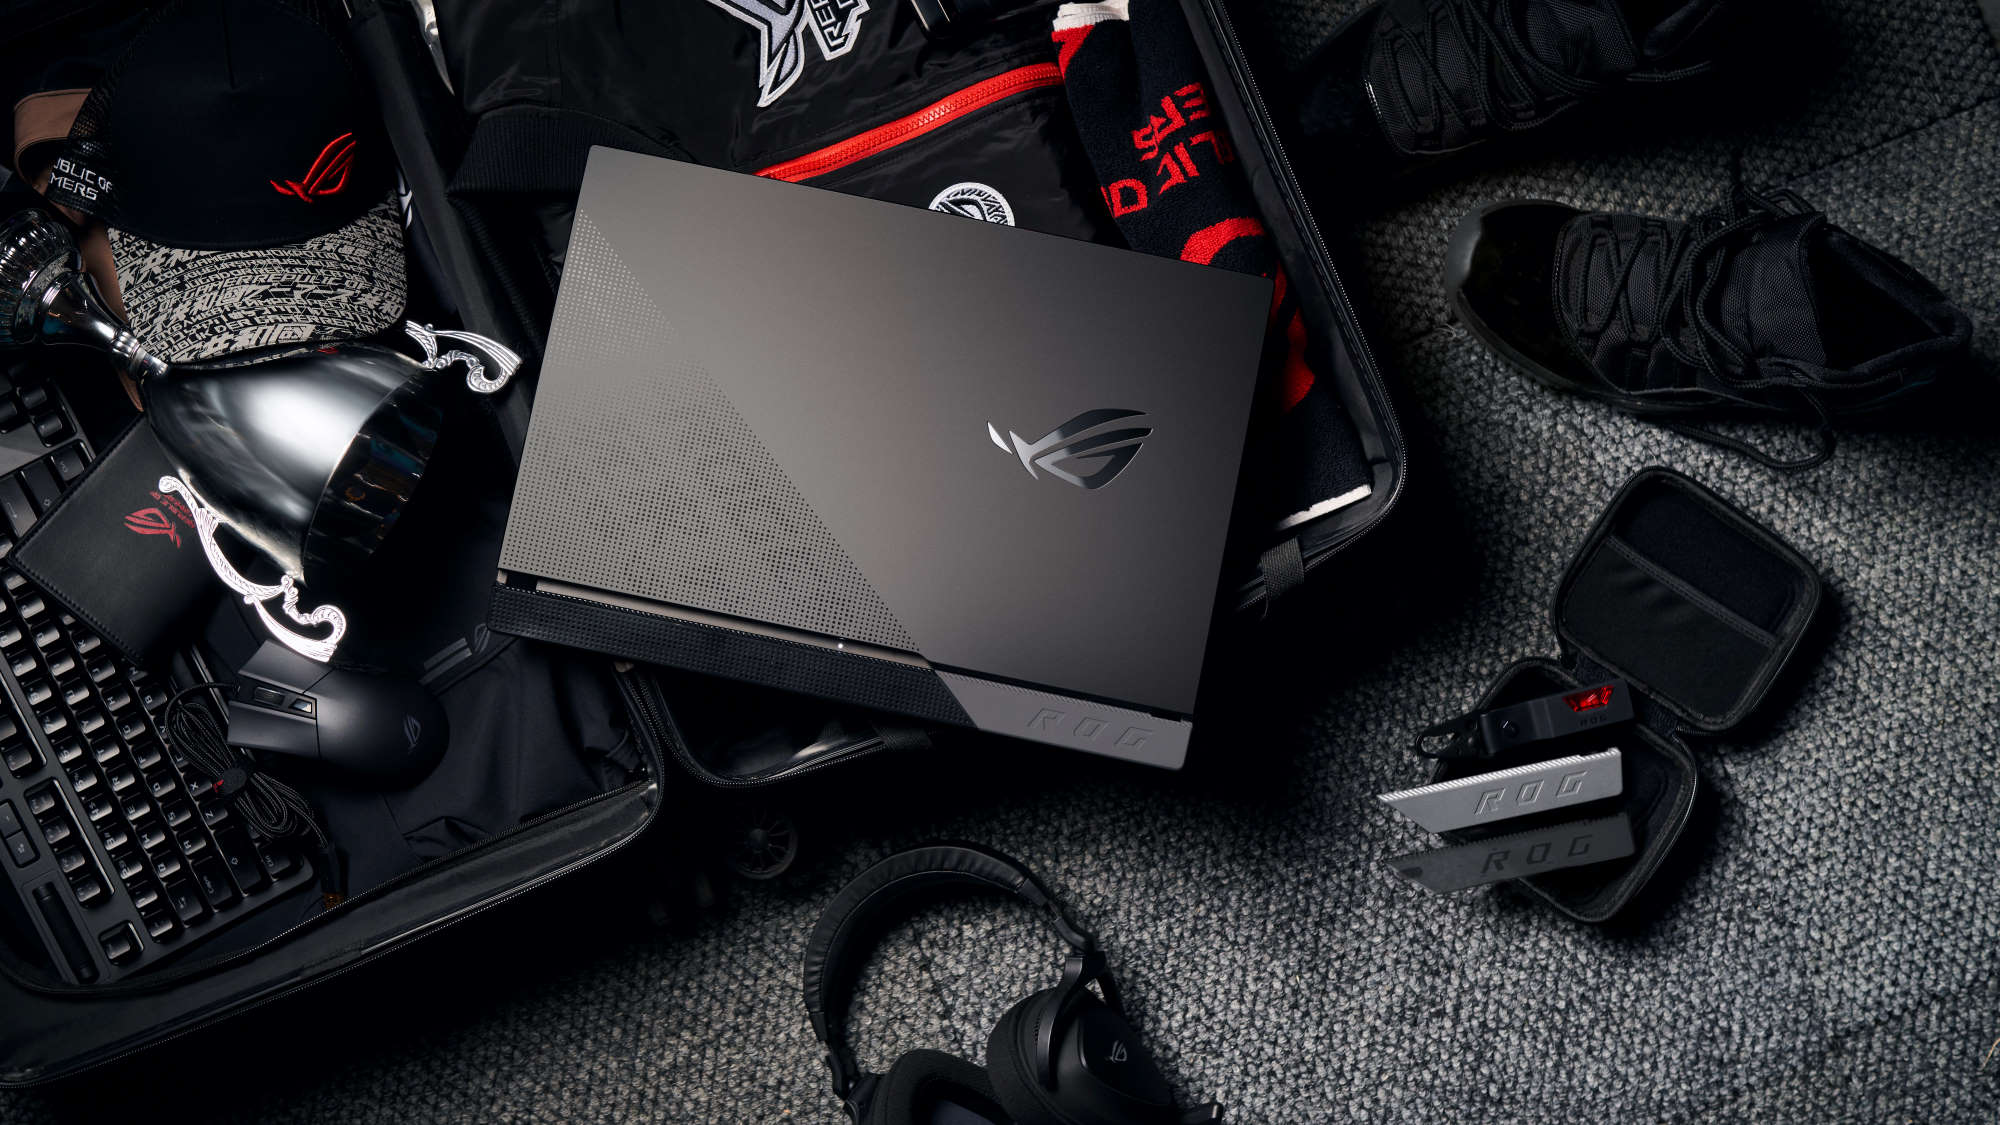 Redesigned ROG Strix gaming laptops introduce the world's fastest notebook  display | ROG - Republic of Gamers United Kingdom